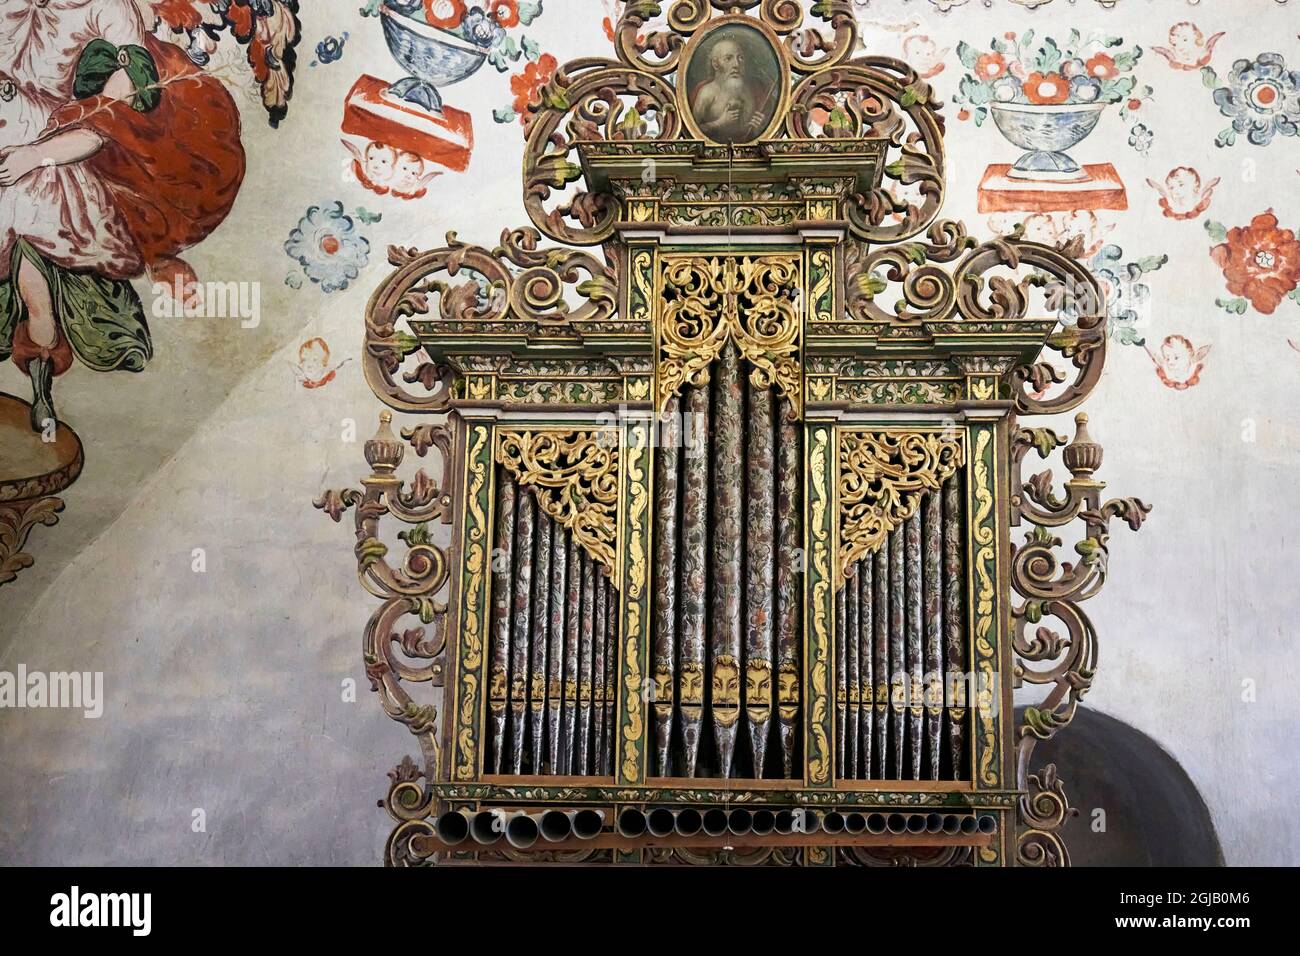 Mexico, Tlacochahuaya. Church of San Jeronimo Tlacochahuaya houses an organ built between 1725 and 1730. Note the faces and open mouths painted around Stock Photo